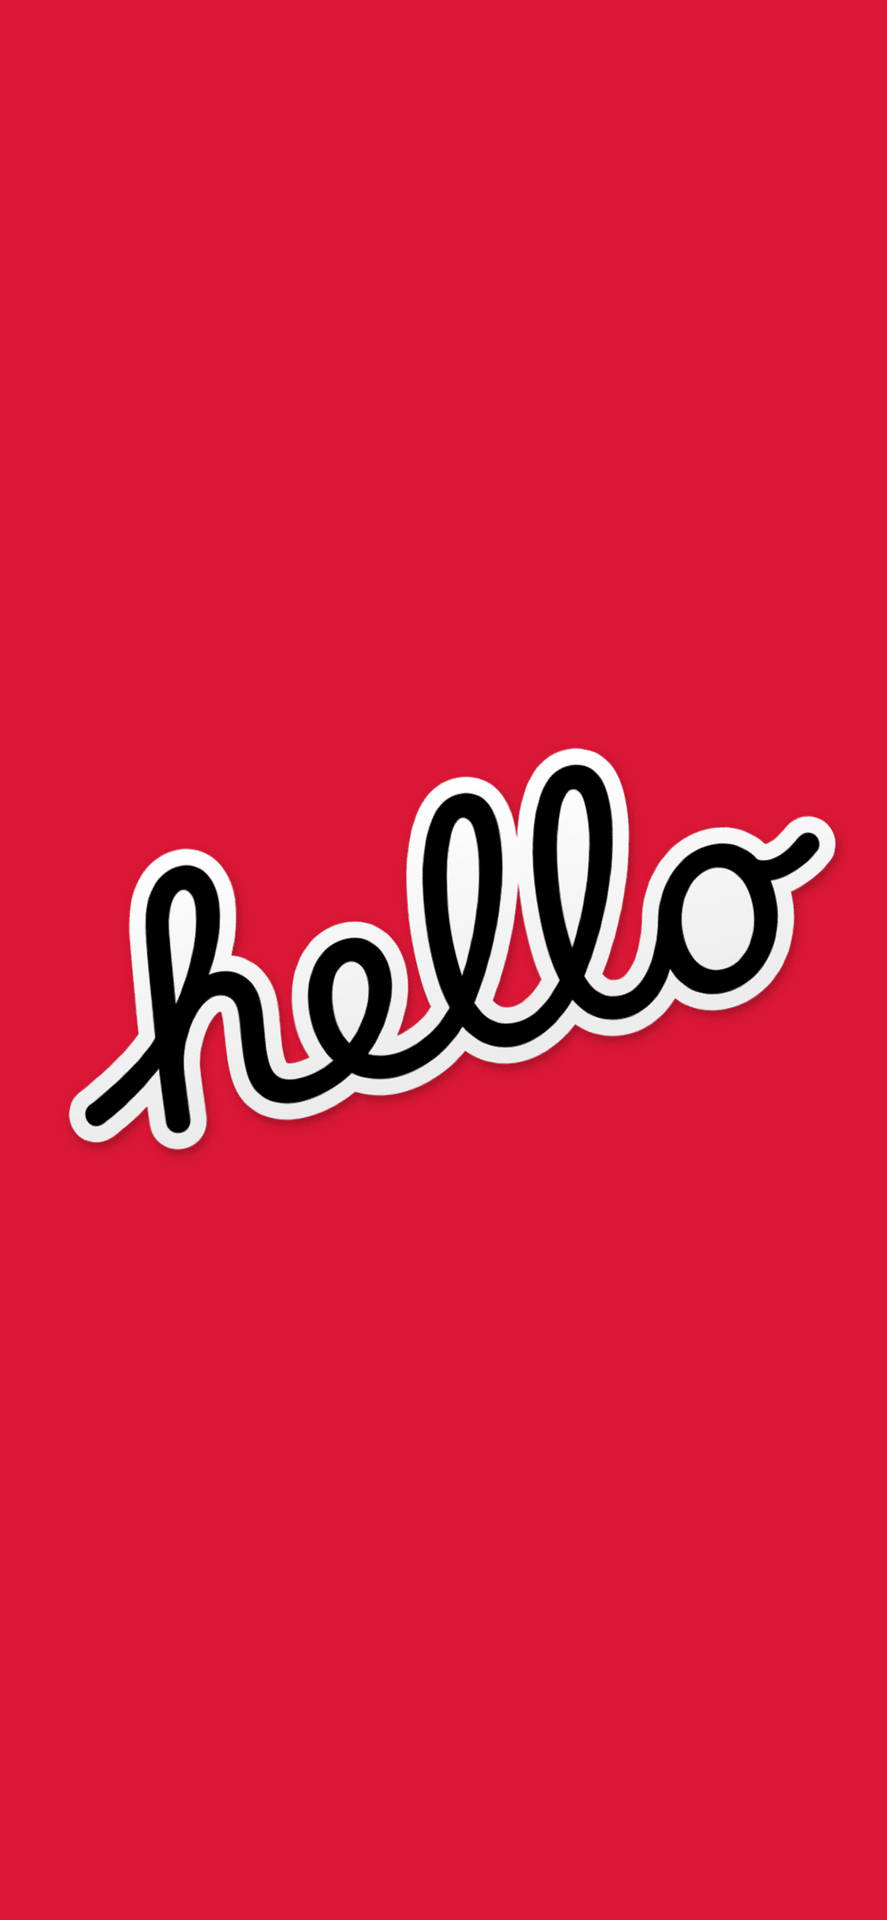 Hello Greeting On Red Background Background